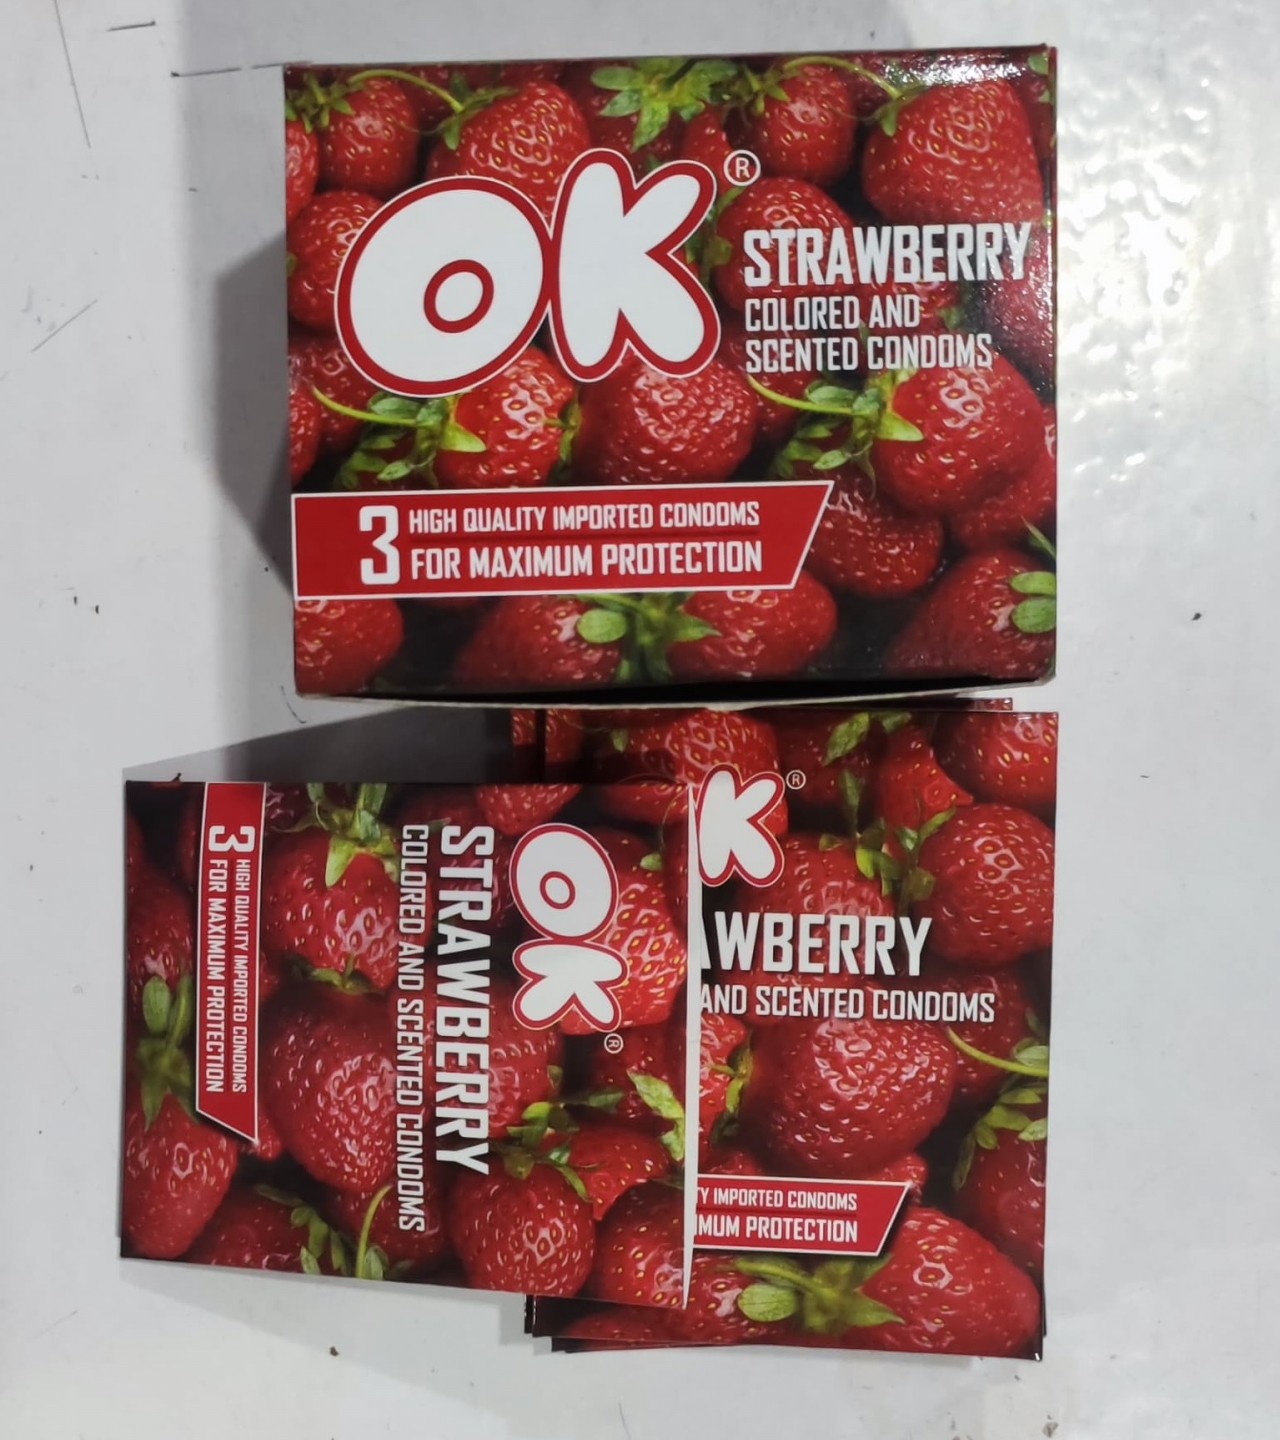 OK Strawberry colored And Scented Condoms